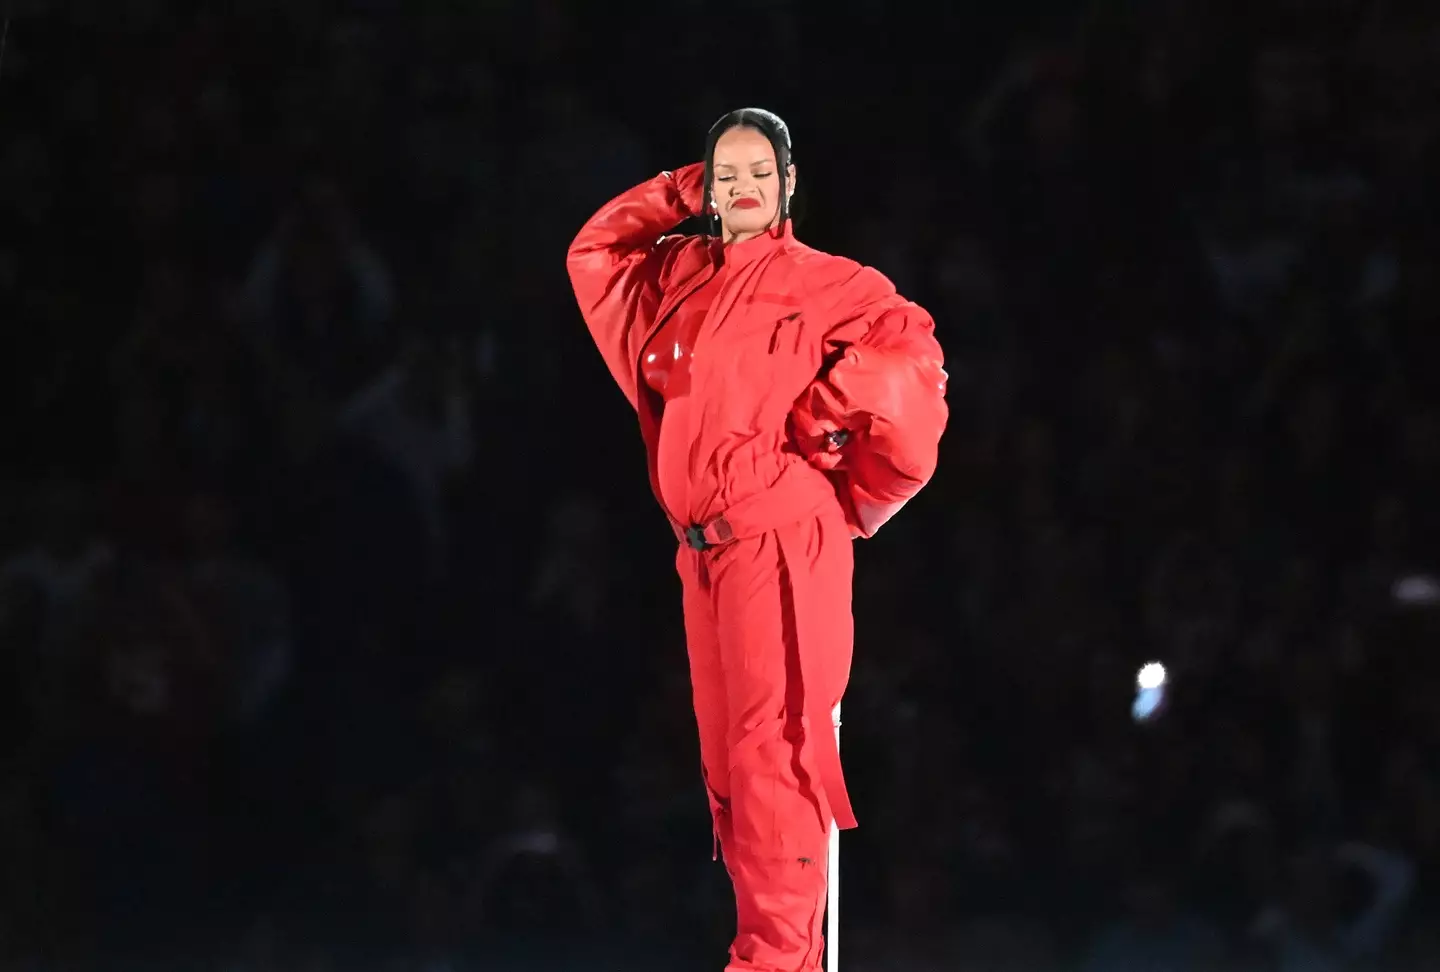 Rihanna announced her pregnancy at the Super Bowl earlier this year.